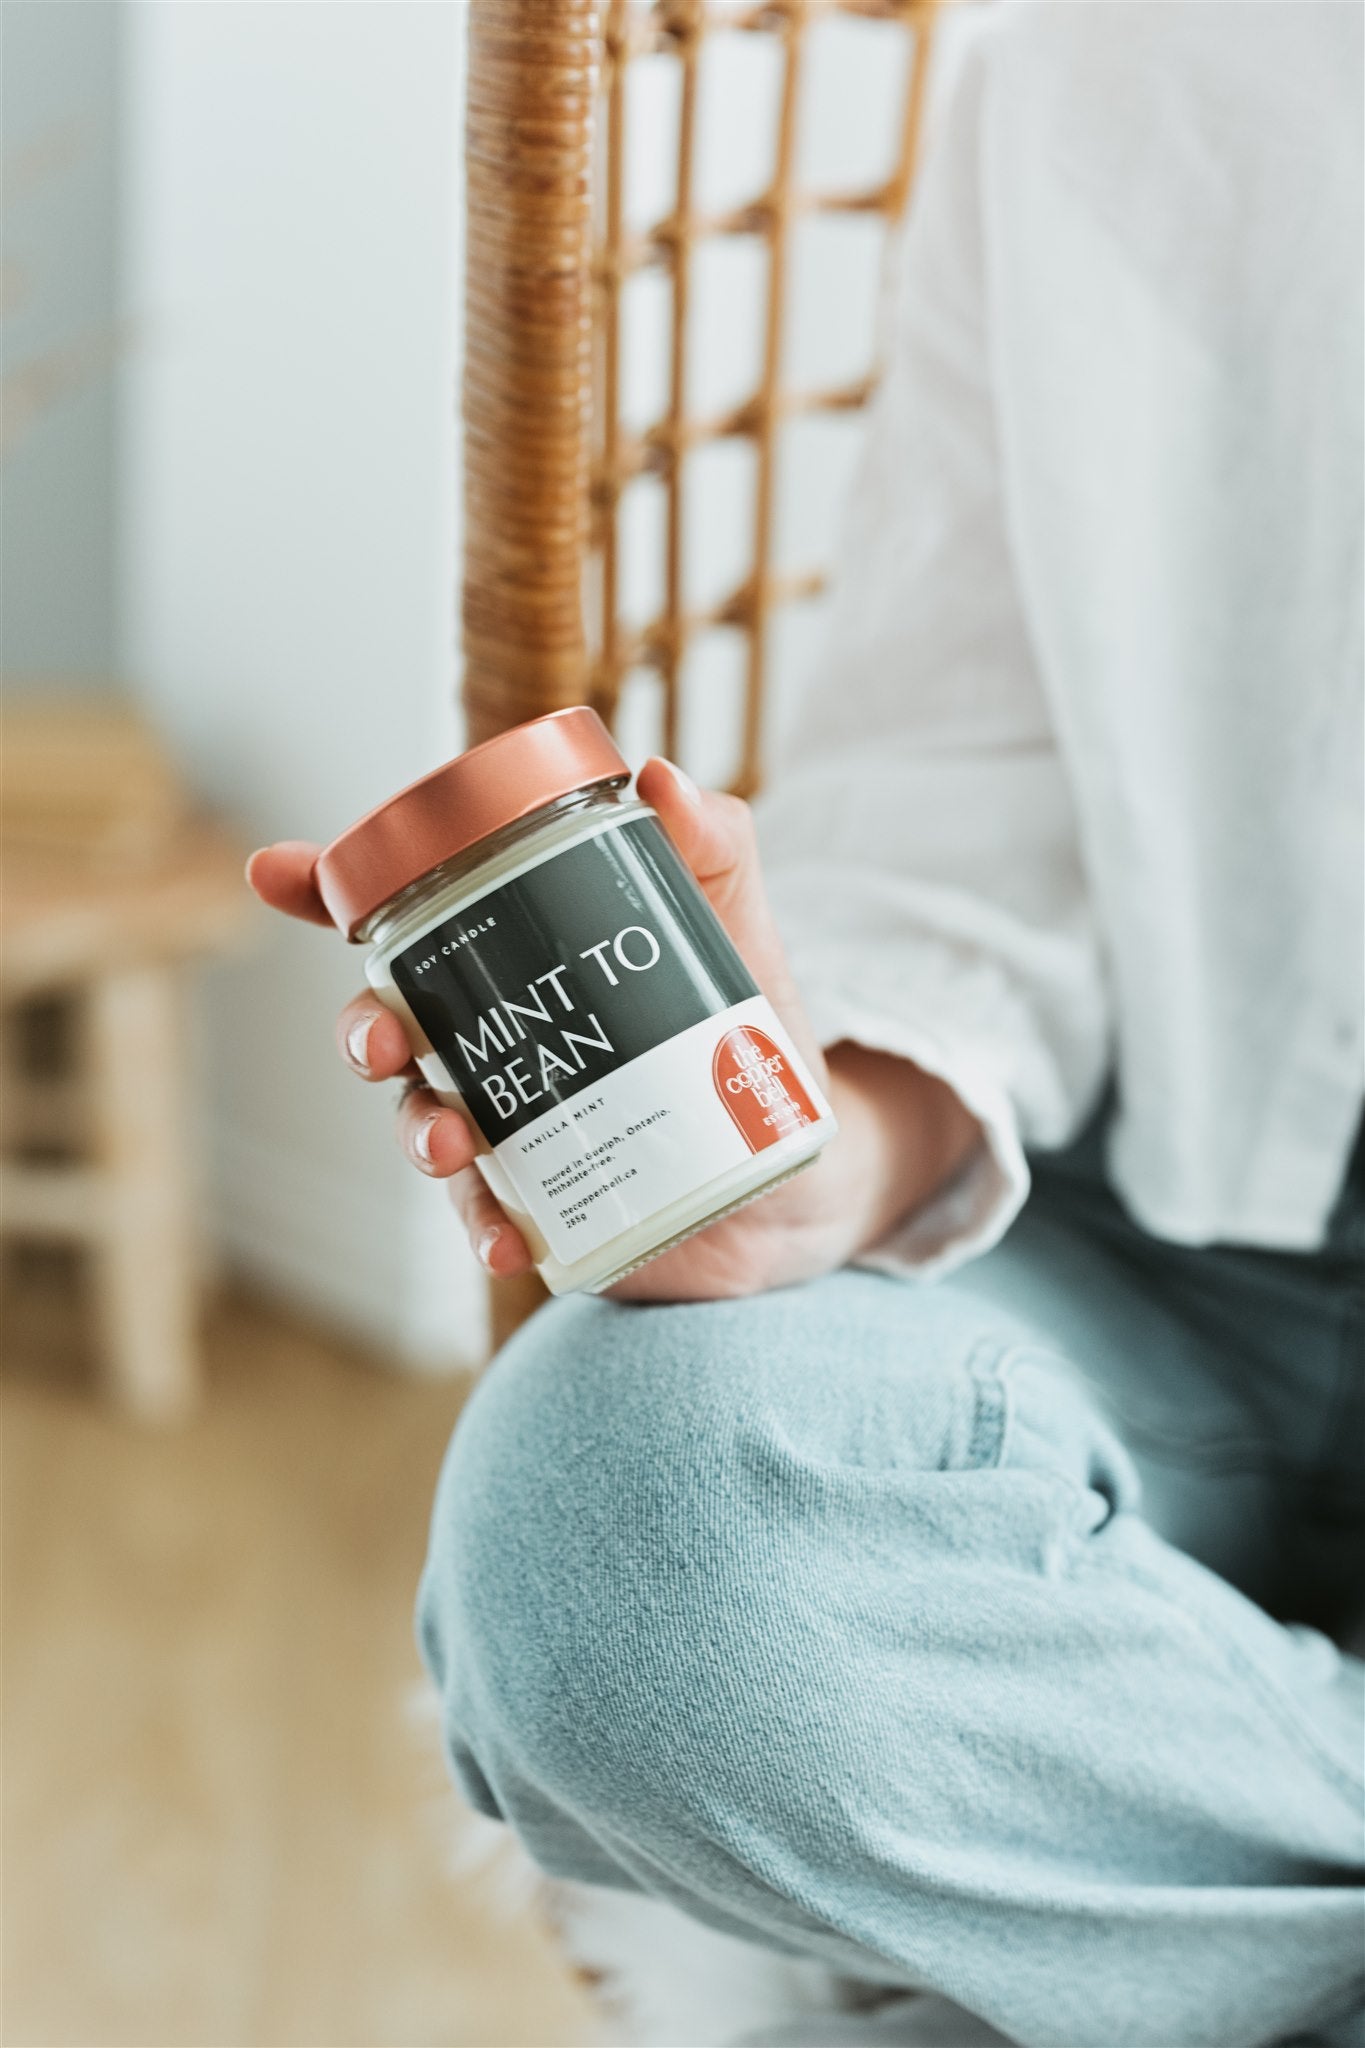 vanilla mint scented candle held by woman wearing white shirt and blue jeans.